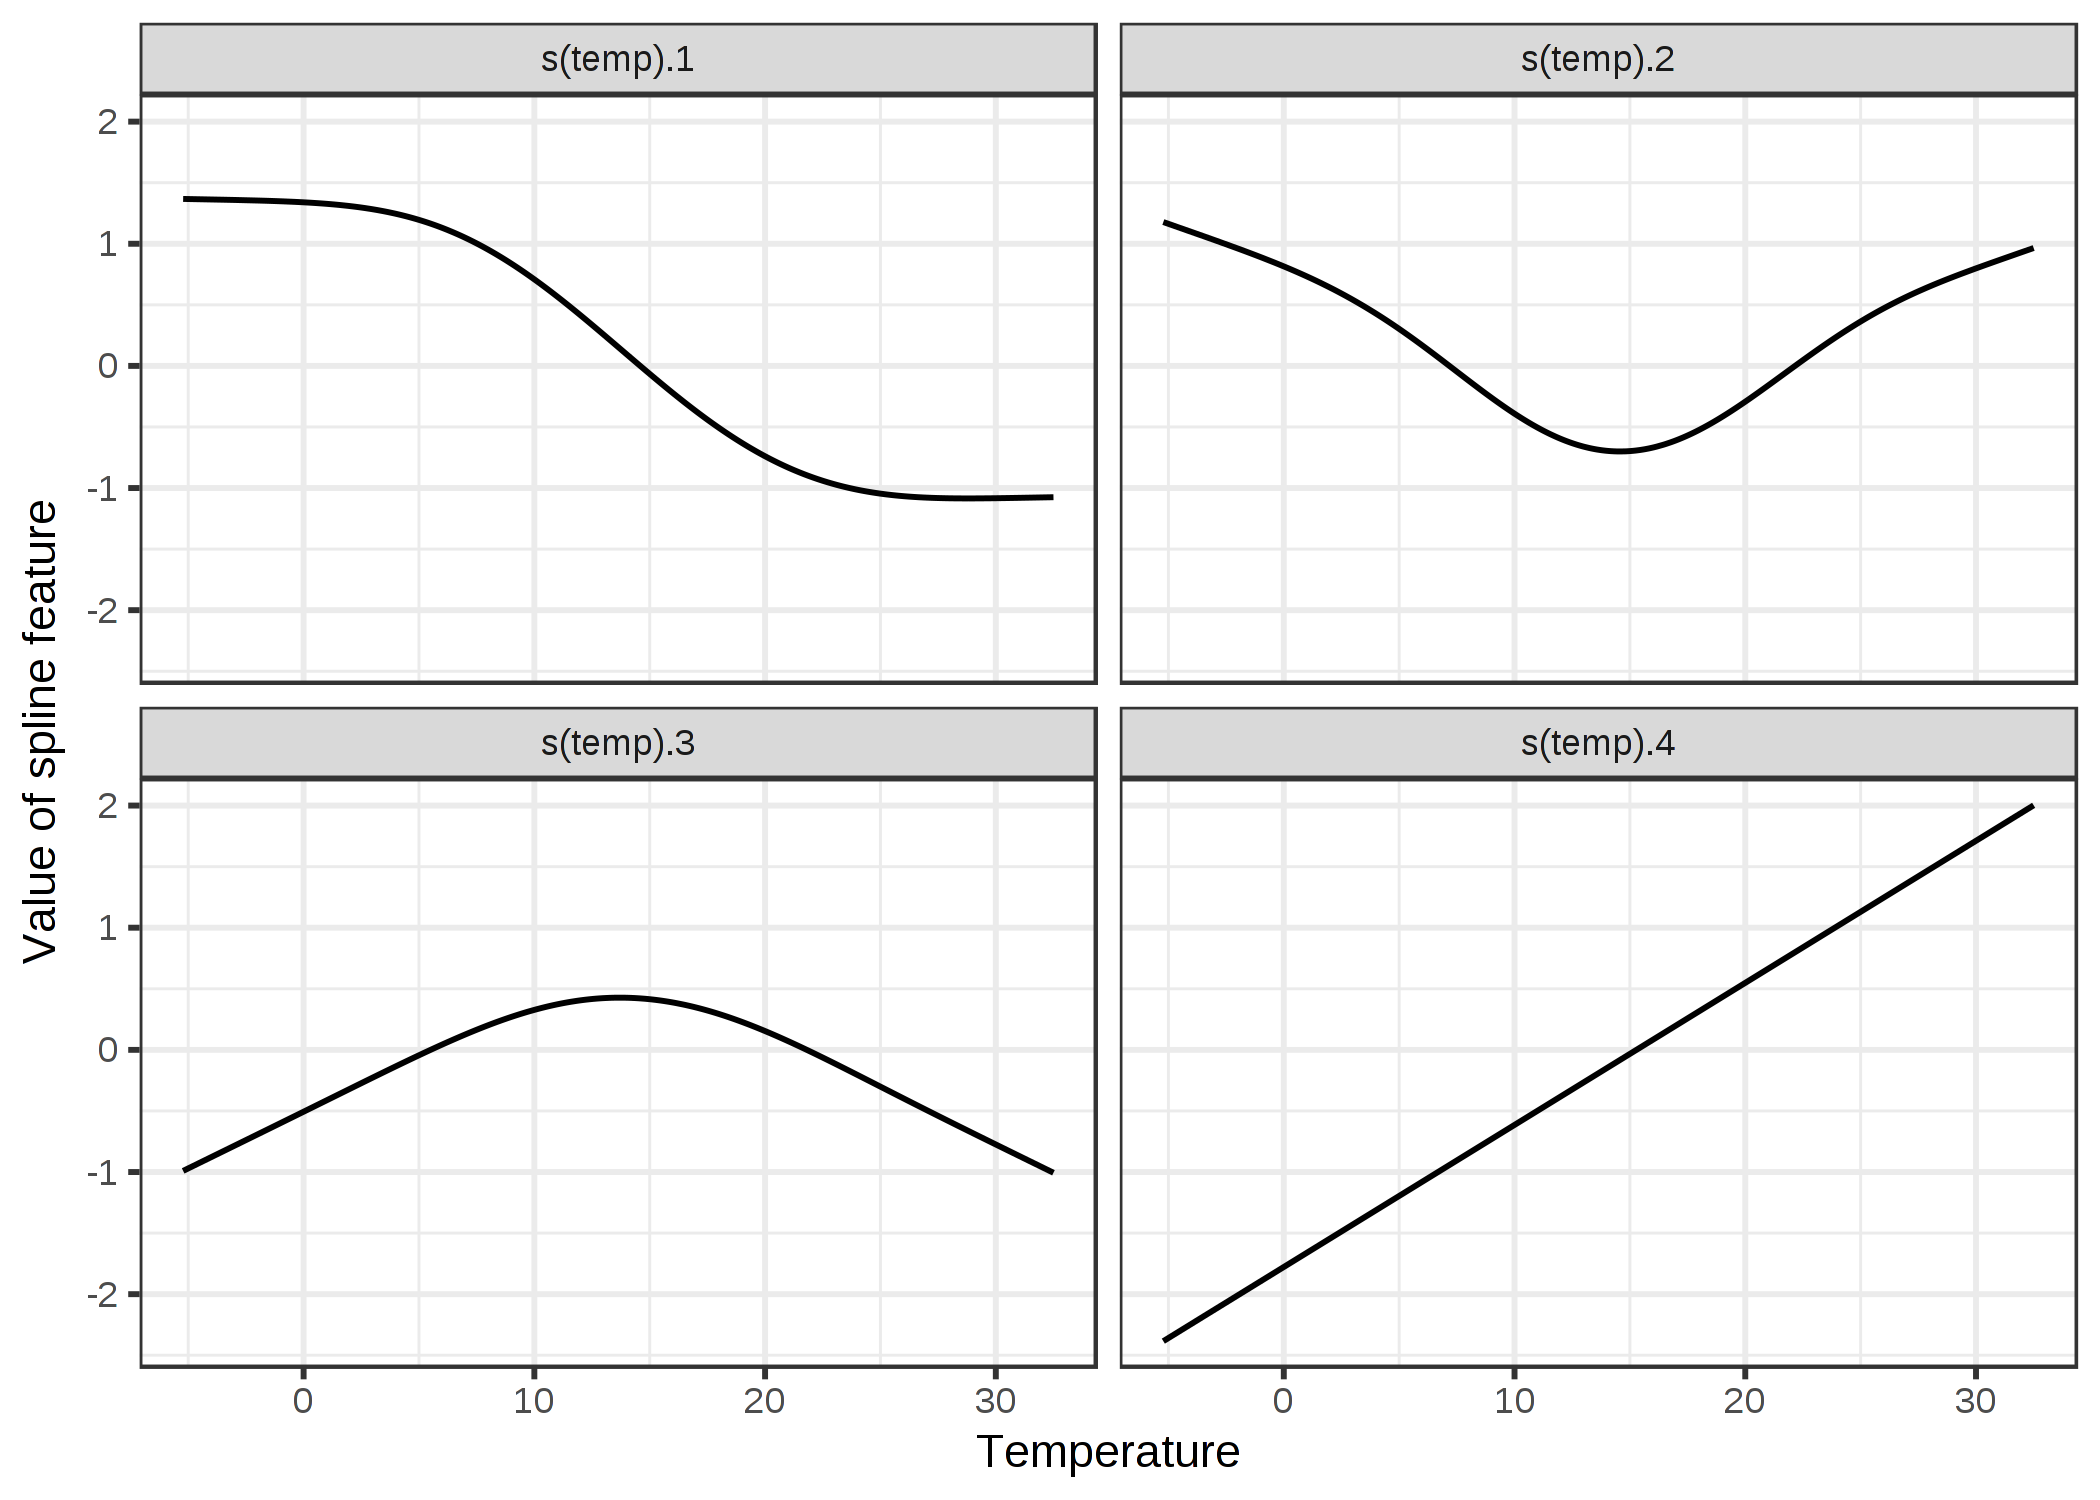 To smoothly model the temperature effect, we use 4 spline functions. Each temperature value is mapped to (here) 4 spline values. If an instance has a temperature of 30 °C, the value for the first spline feature is -1, for the second 0.7, for the third -0.8 and for the 4th 1.7.